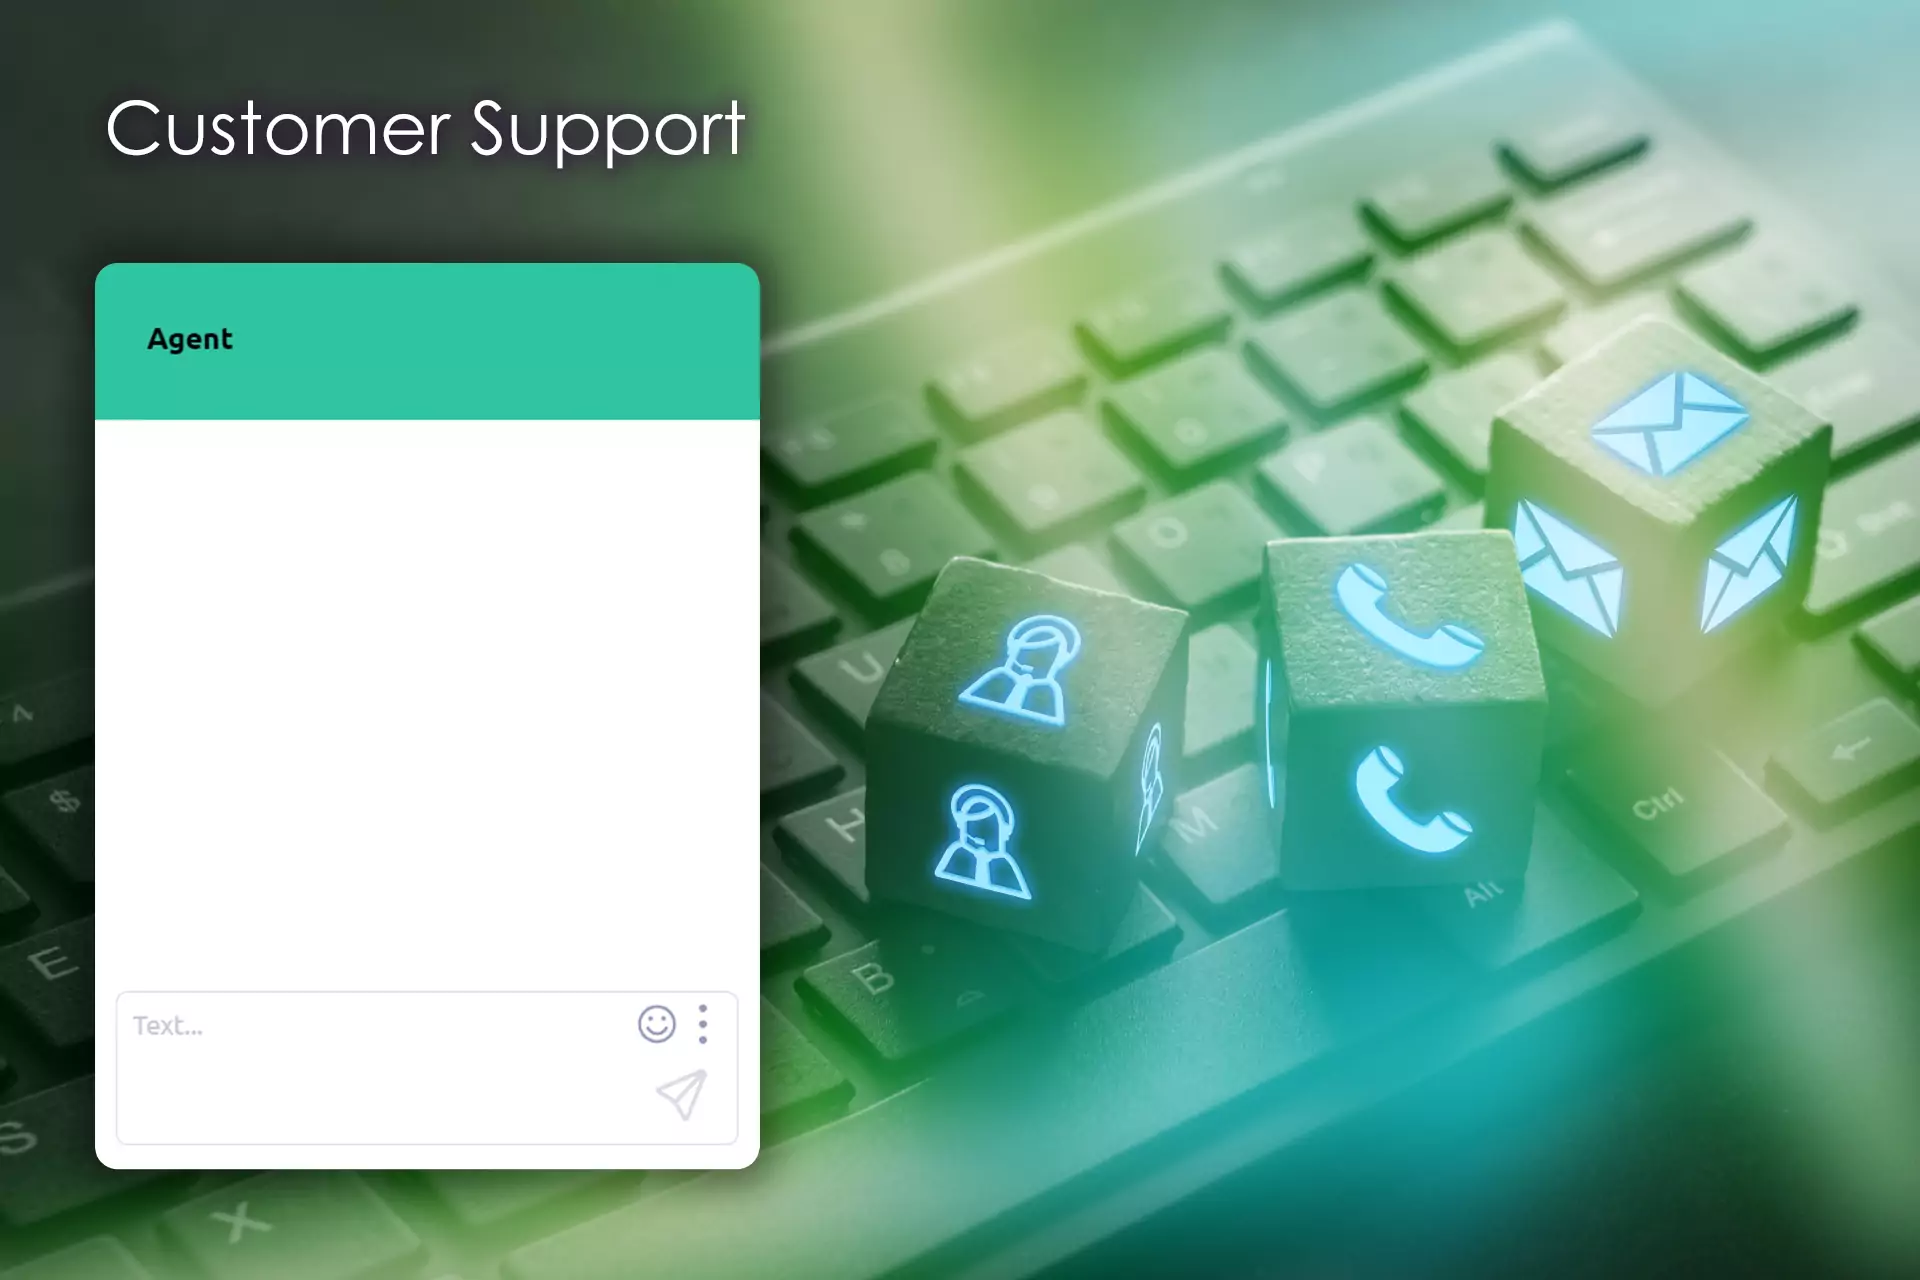 If you have any questions about playing on the platform, write to customer support.